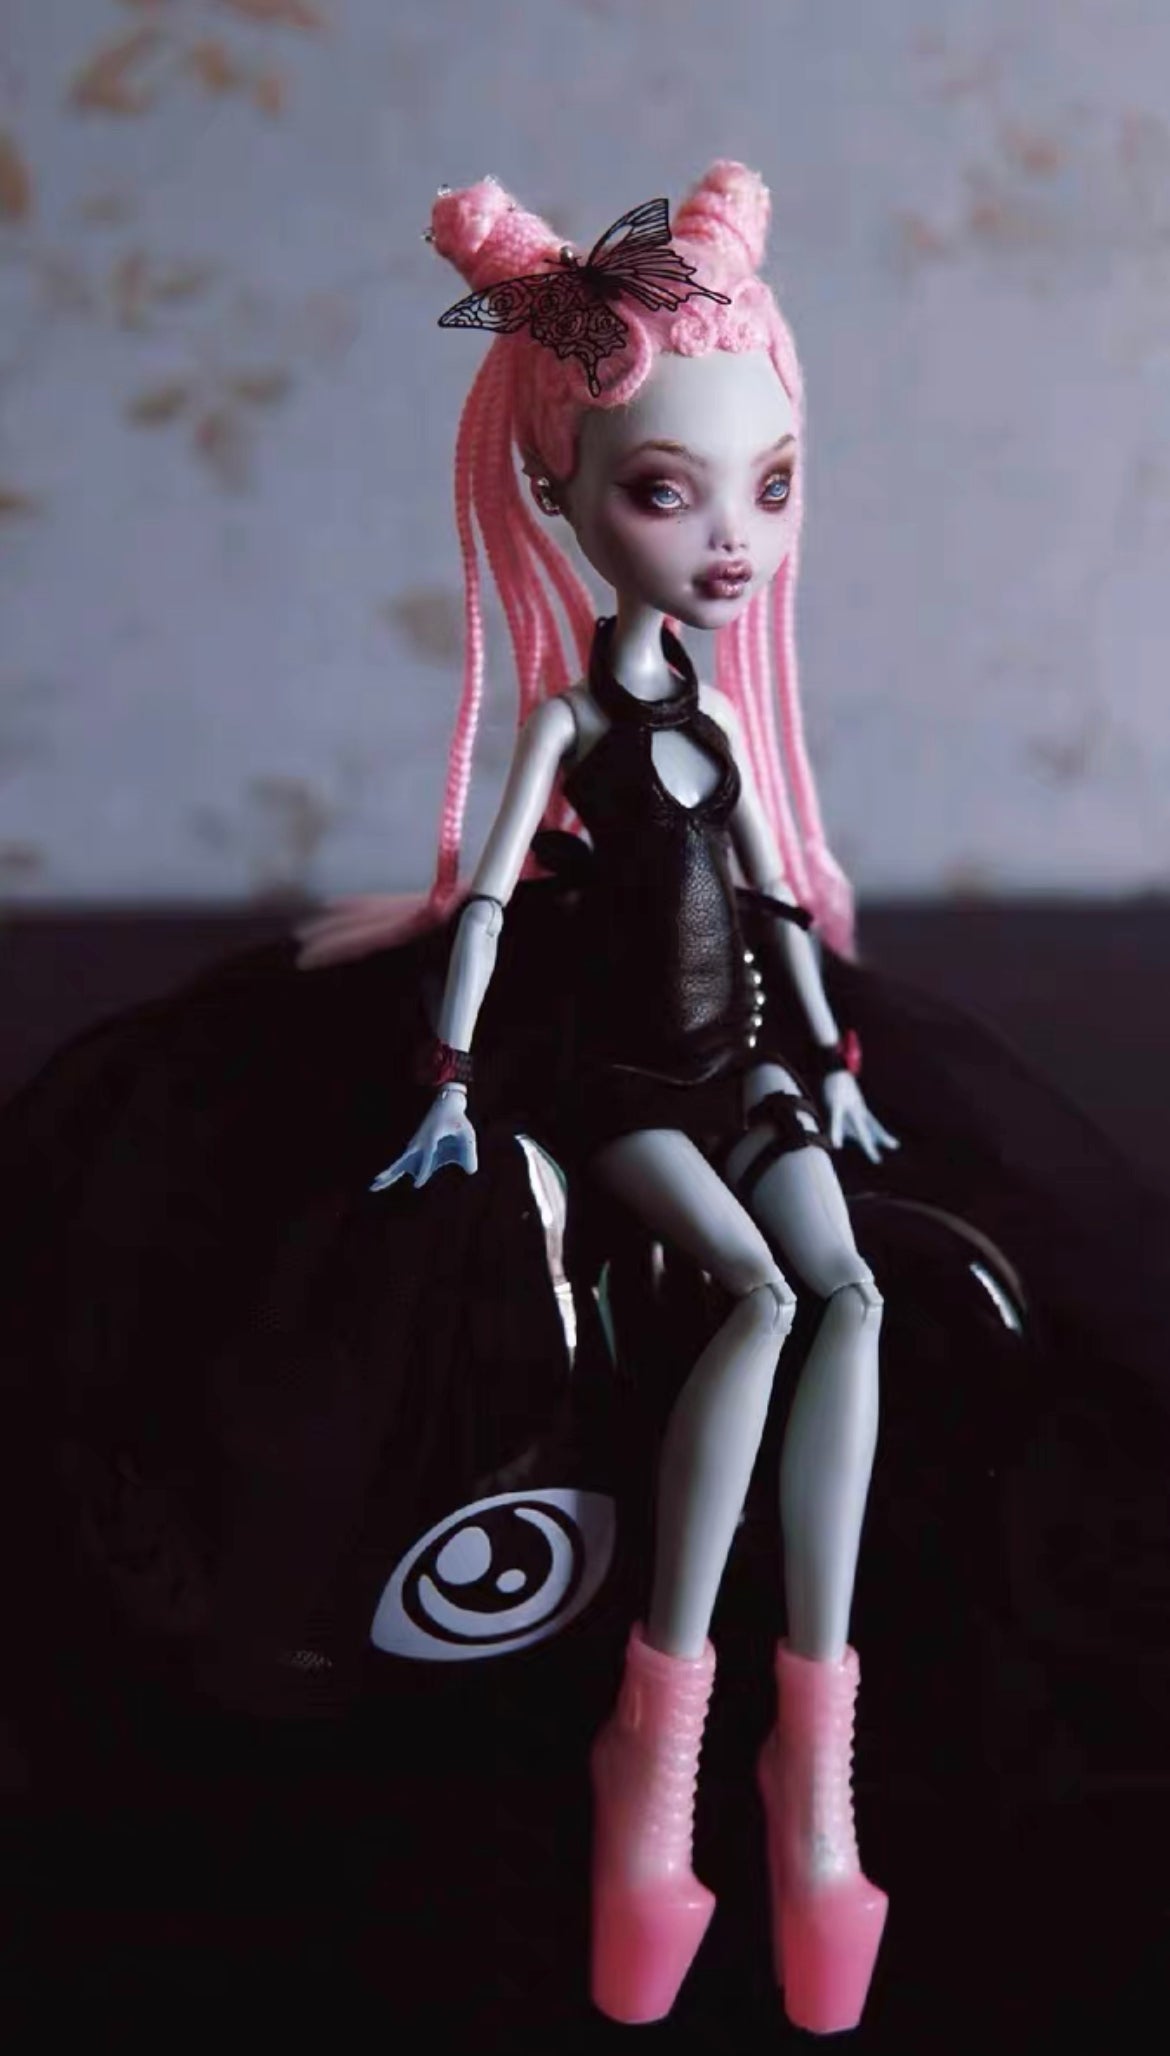 Monster high dolls clothes,dresses,accessories, shoes and clothing 01